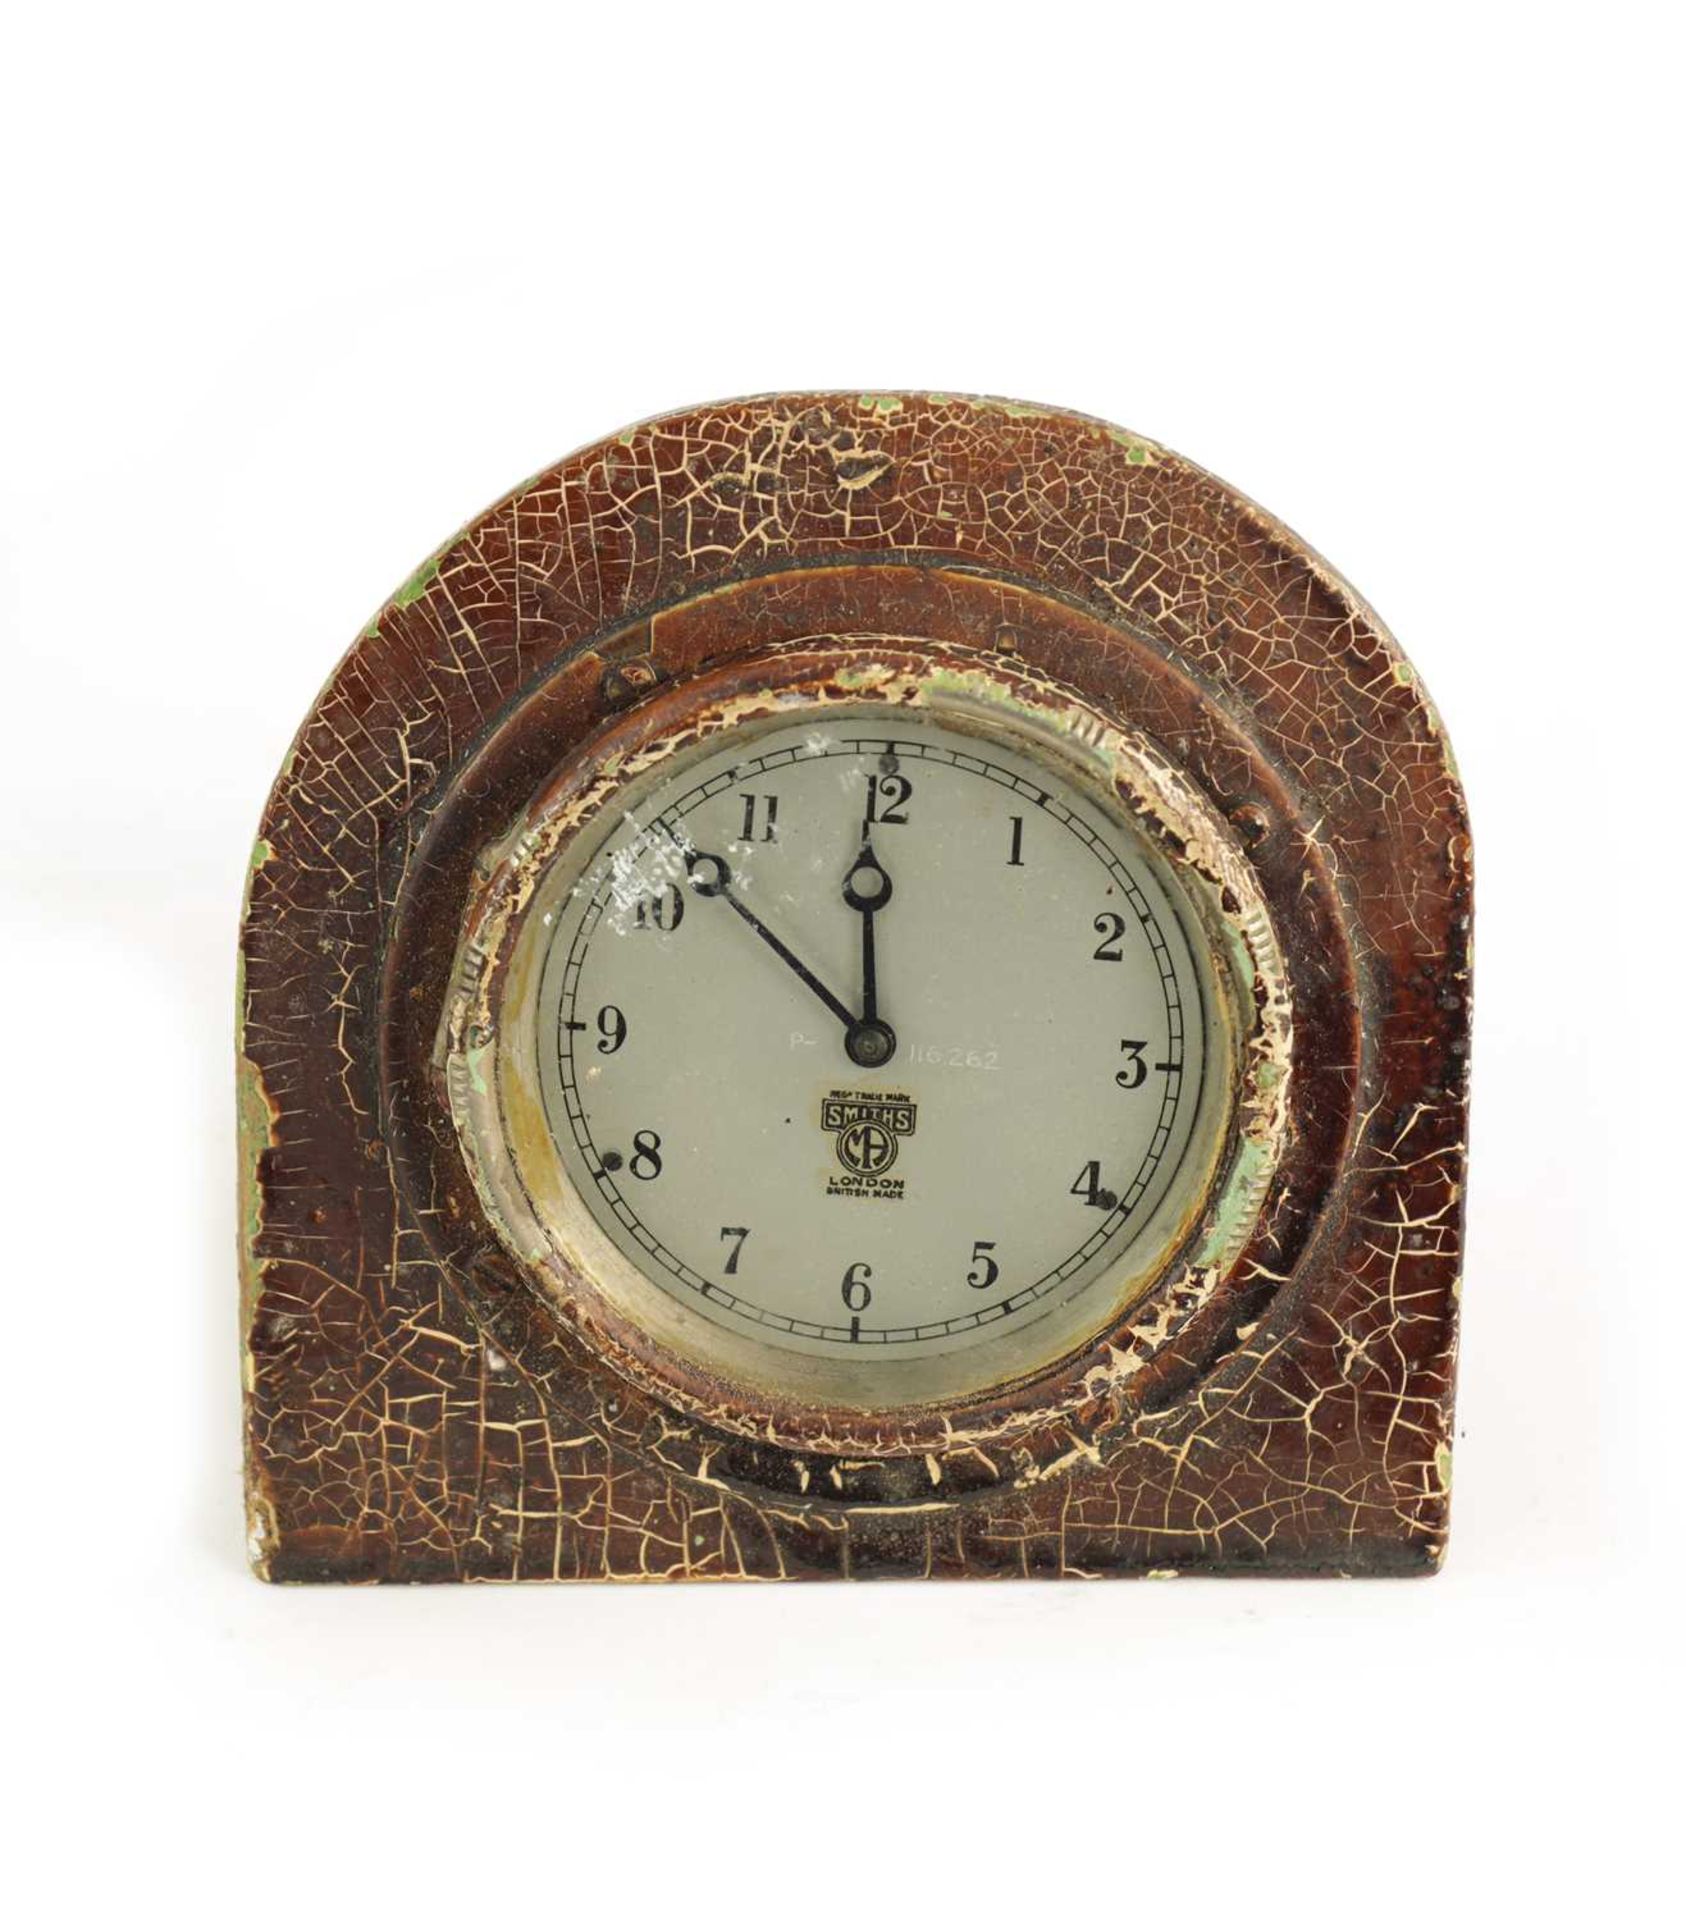 A 1920S SMITHS INSTRUMENT PANEL CLOCK